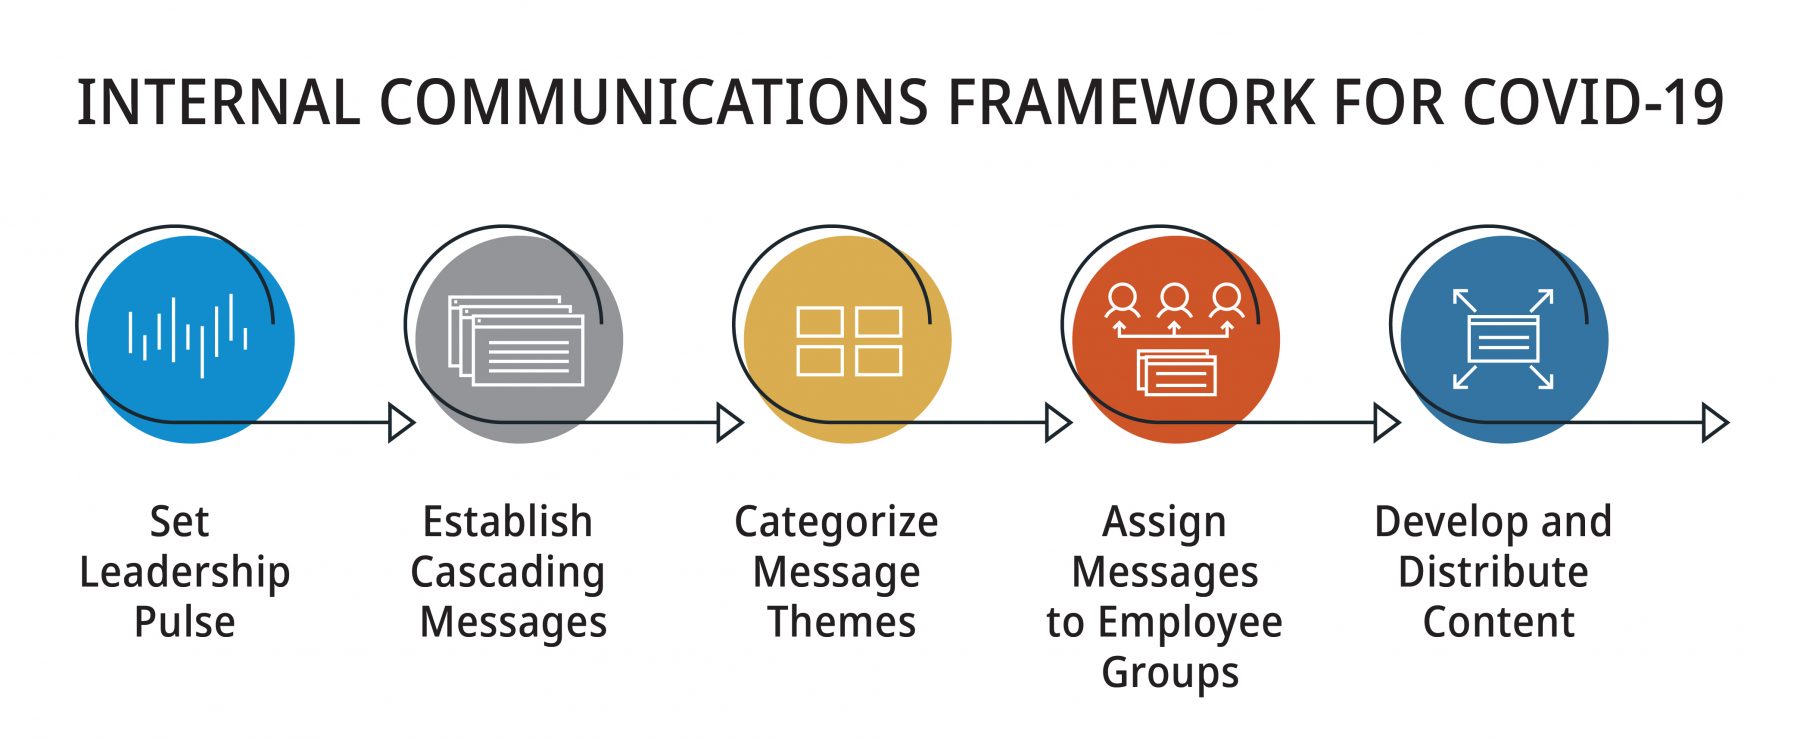 Internal Communications Process for COVID-19